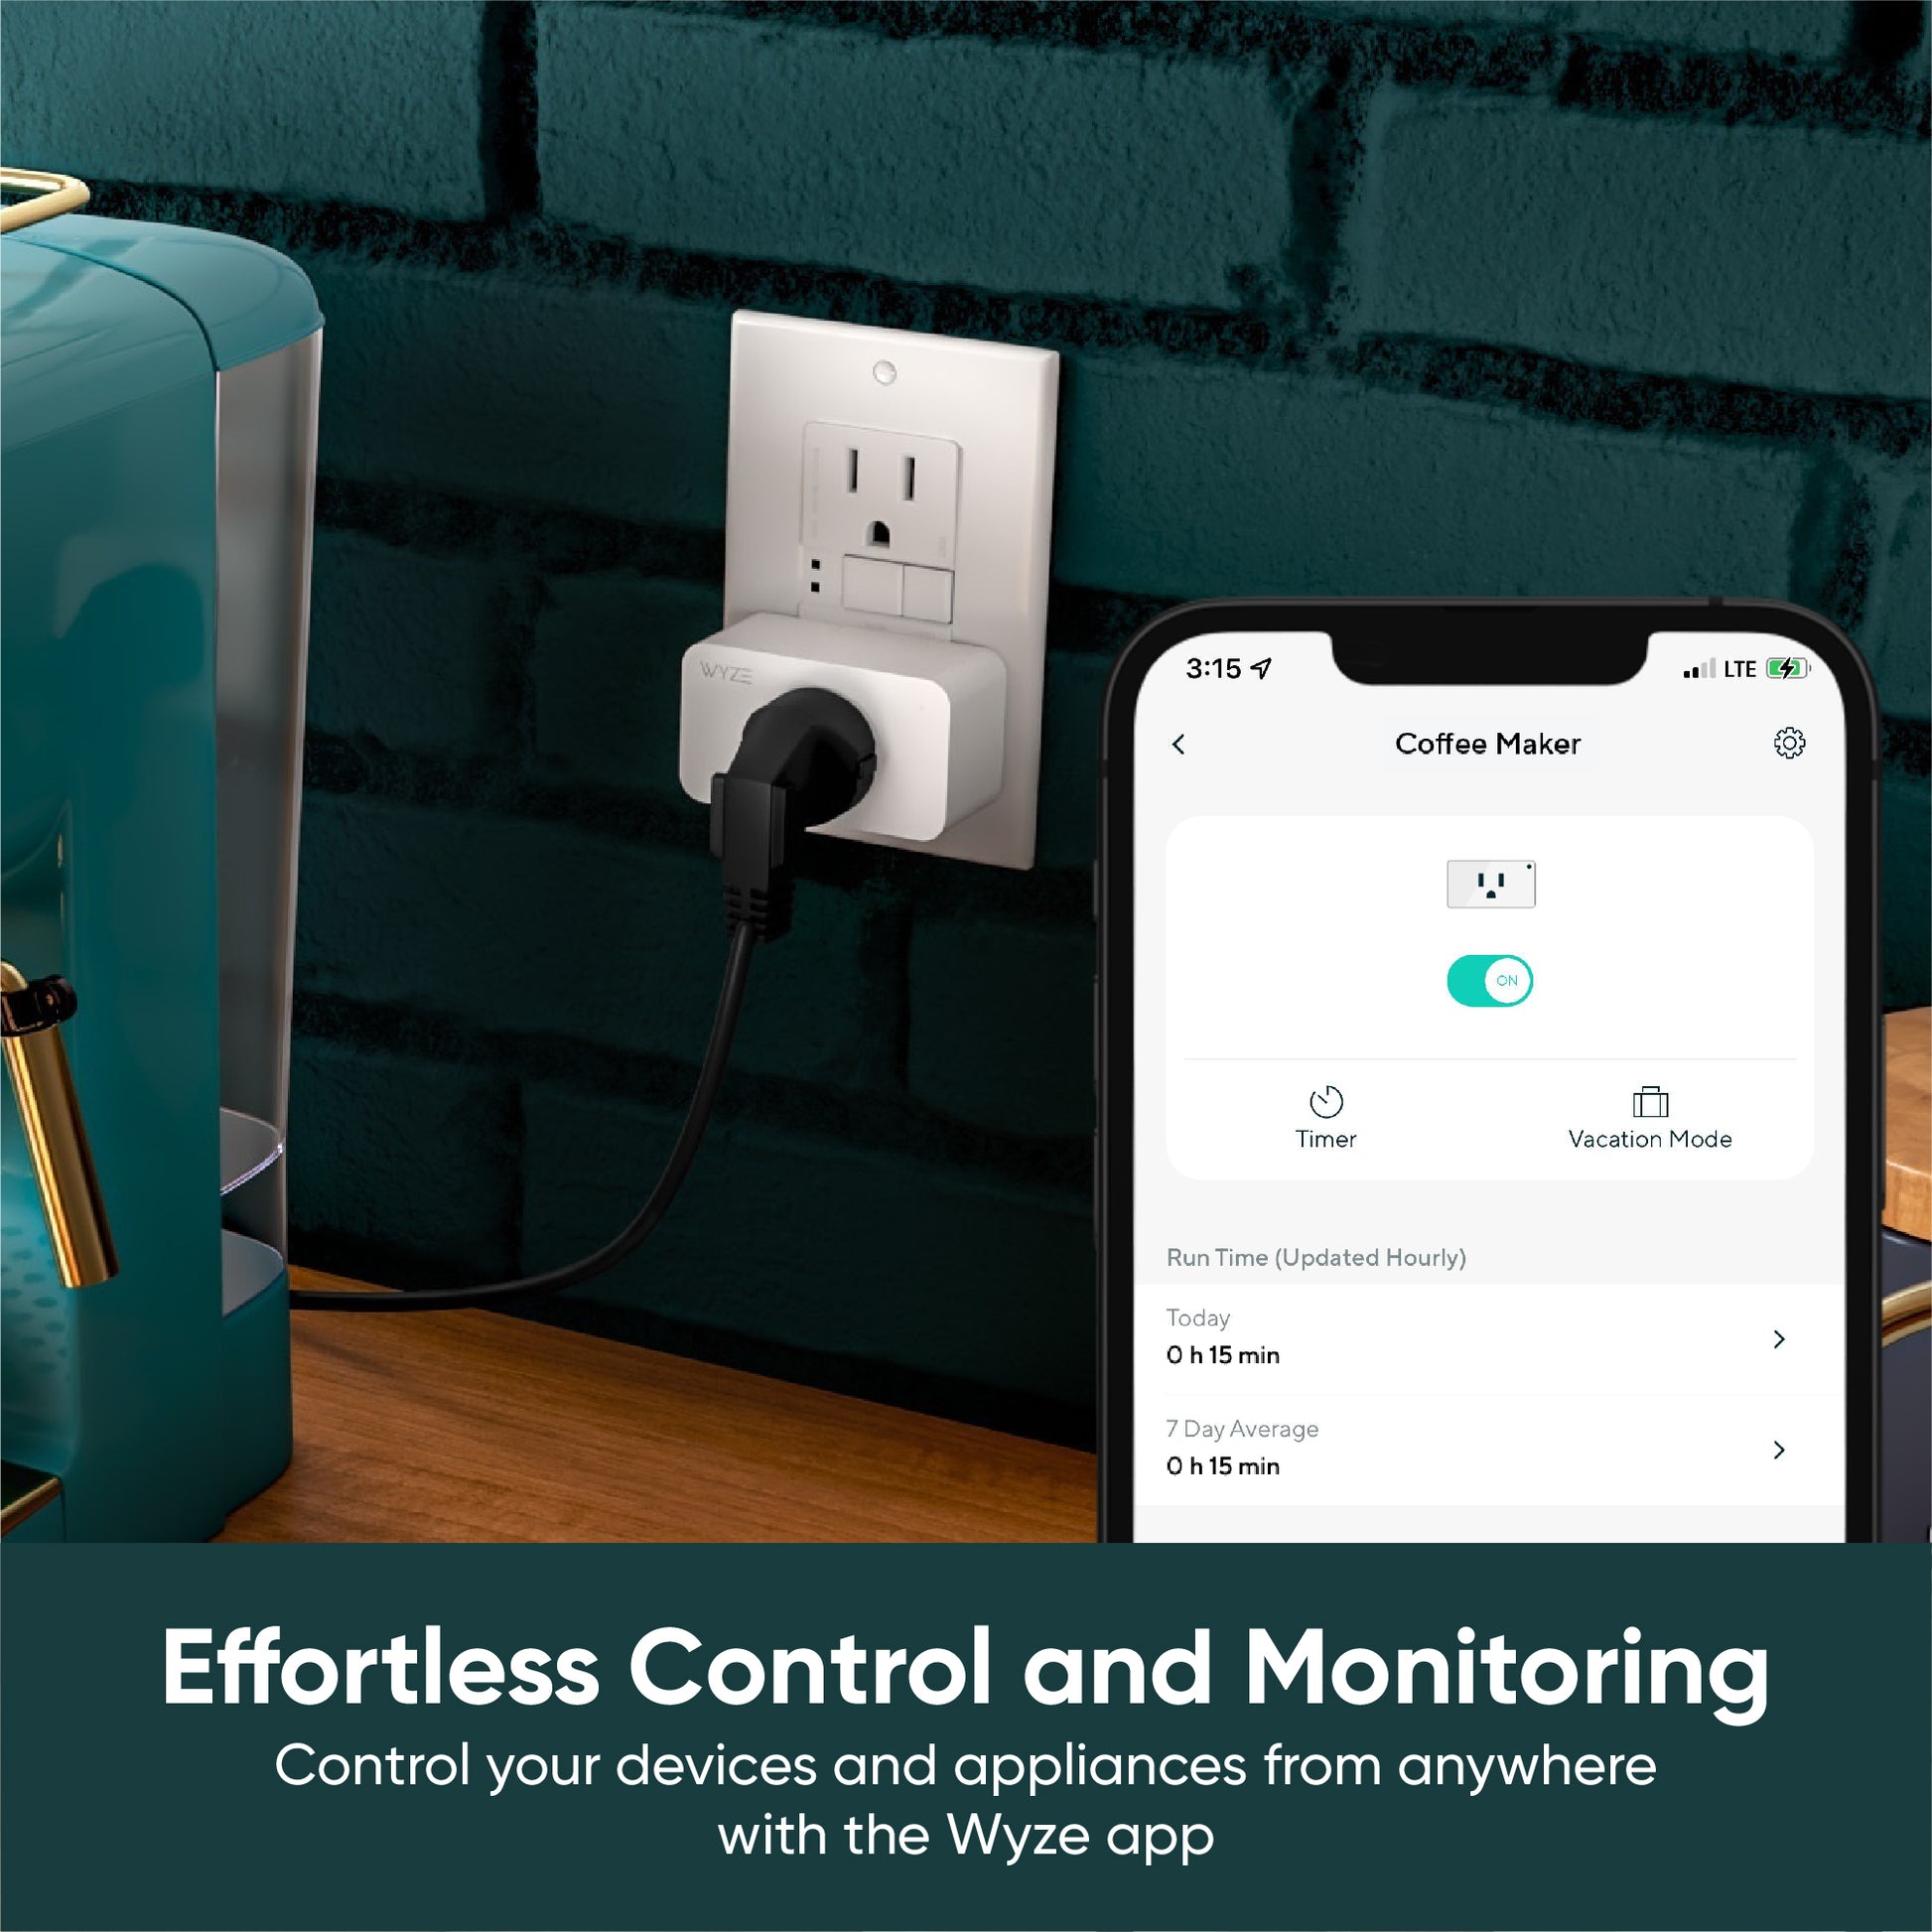 Govee Smart Plug, WiFi Outlet Works with Alexa and Google Assistant, Mini Smart Home Plugs with Timer Fuction & Group Controller, No Hub Required, ETL